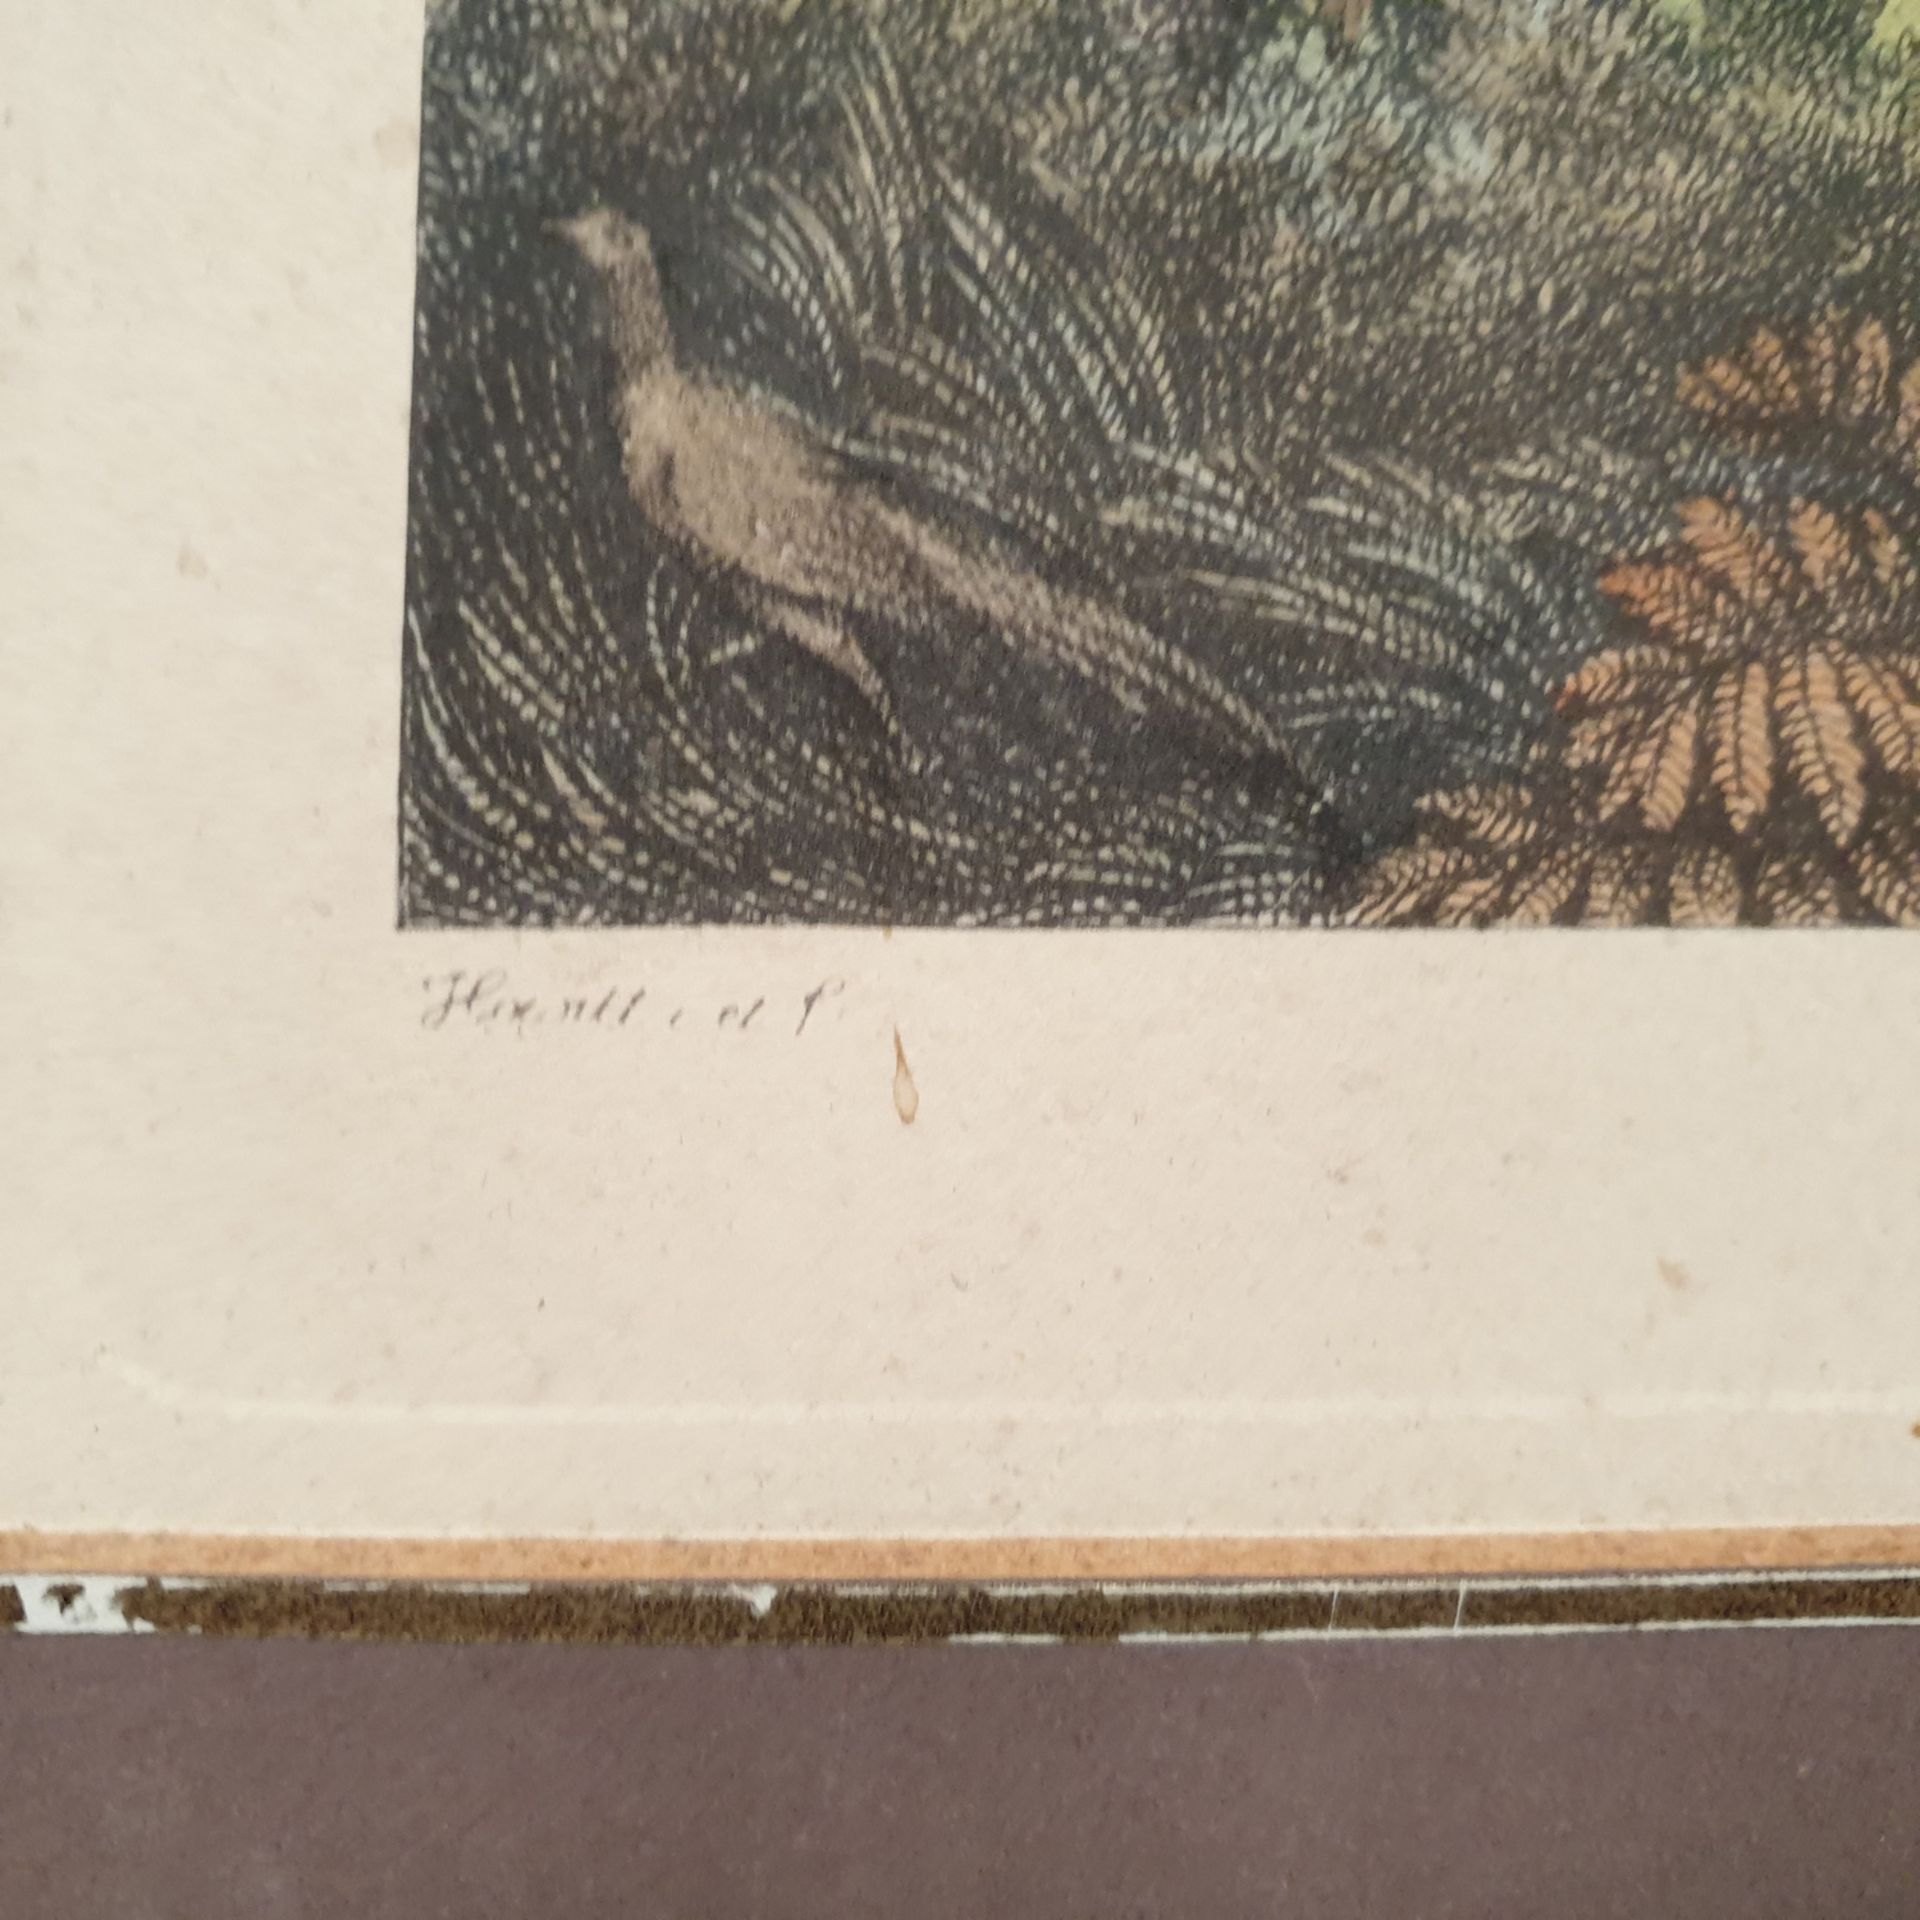 Pheasant Shooting' Framed Picture. Published May 12 1900. Approx Dimensions 17" x 15 1/2". - Image 3 of 5